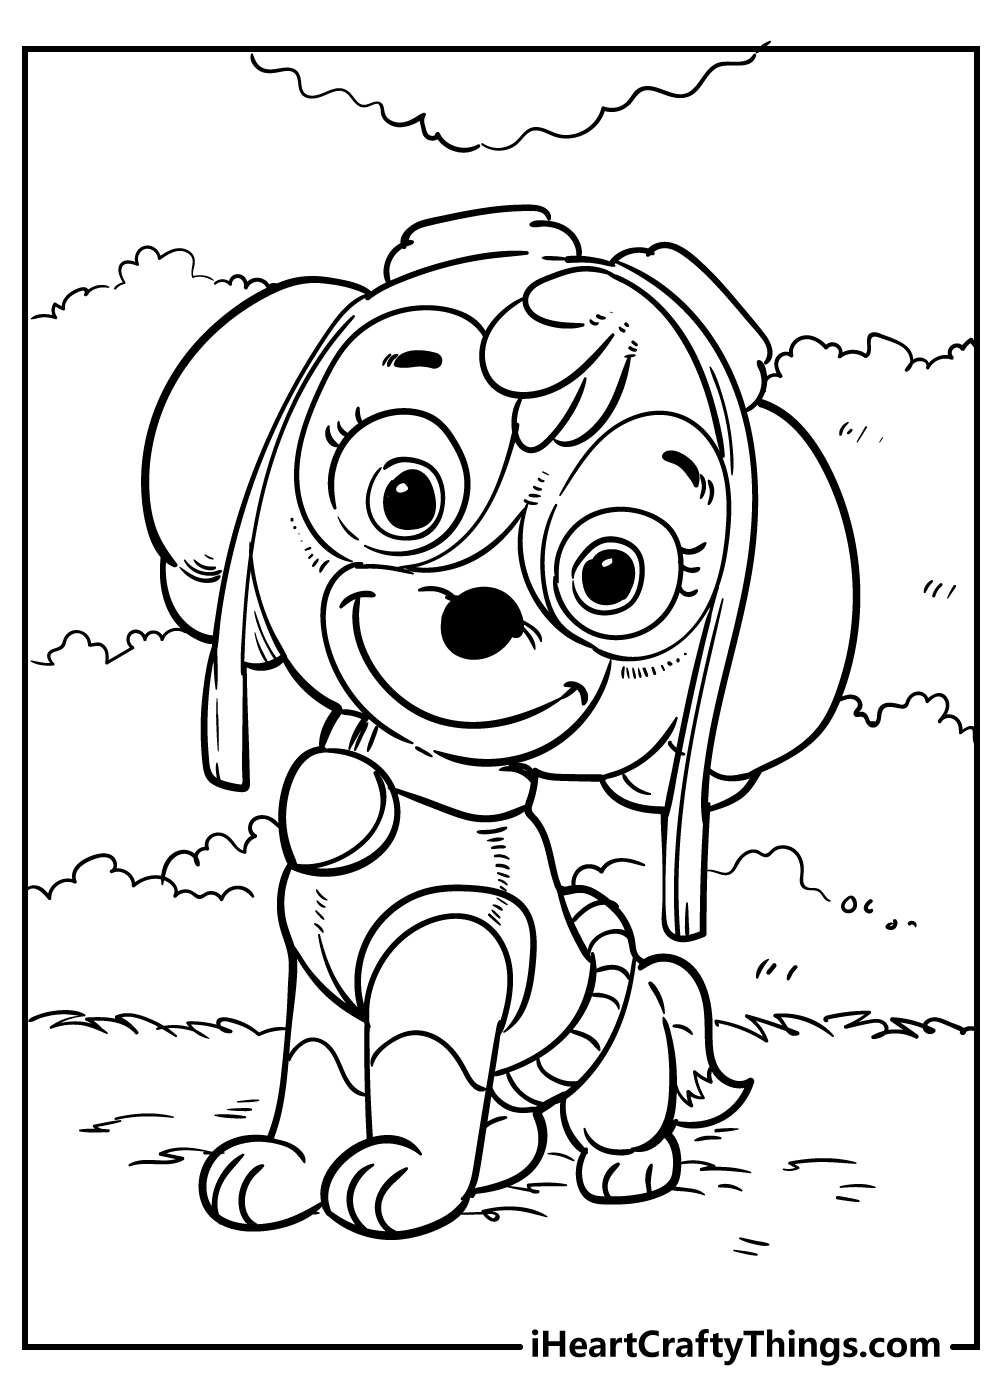 Paw Patrol Coloring Pages FREE Printable 93